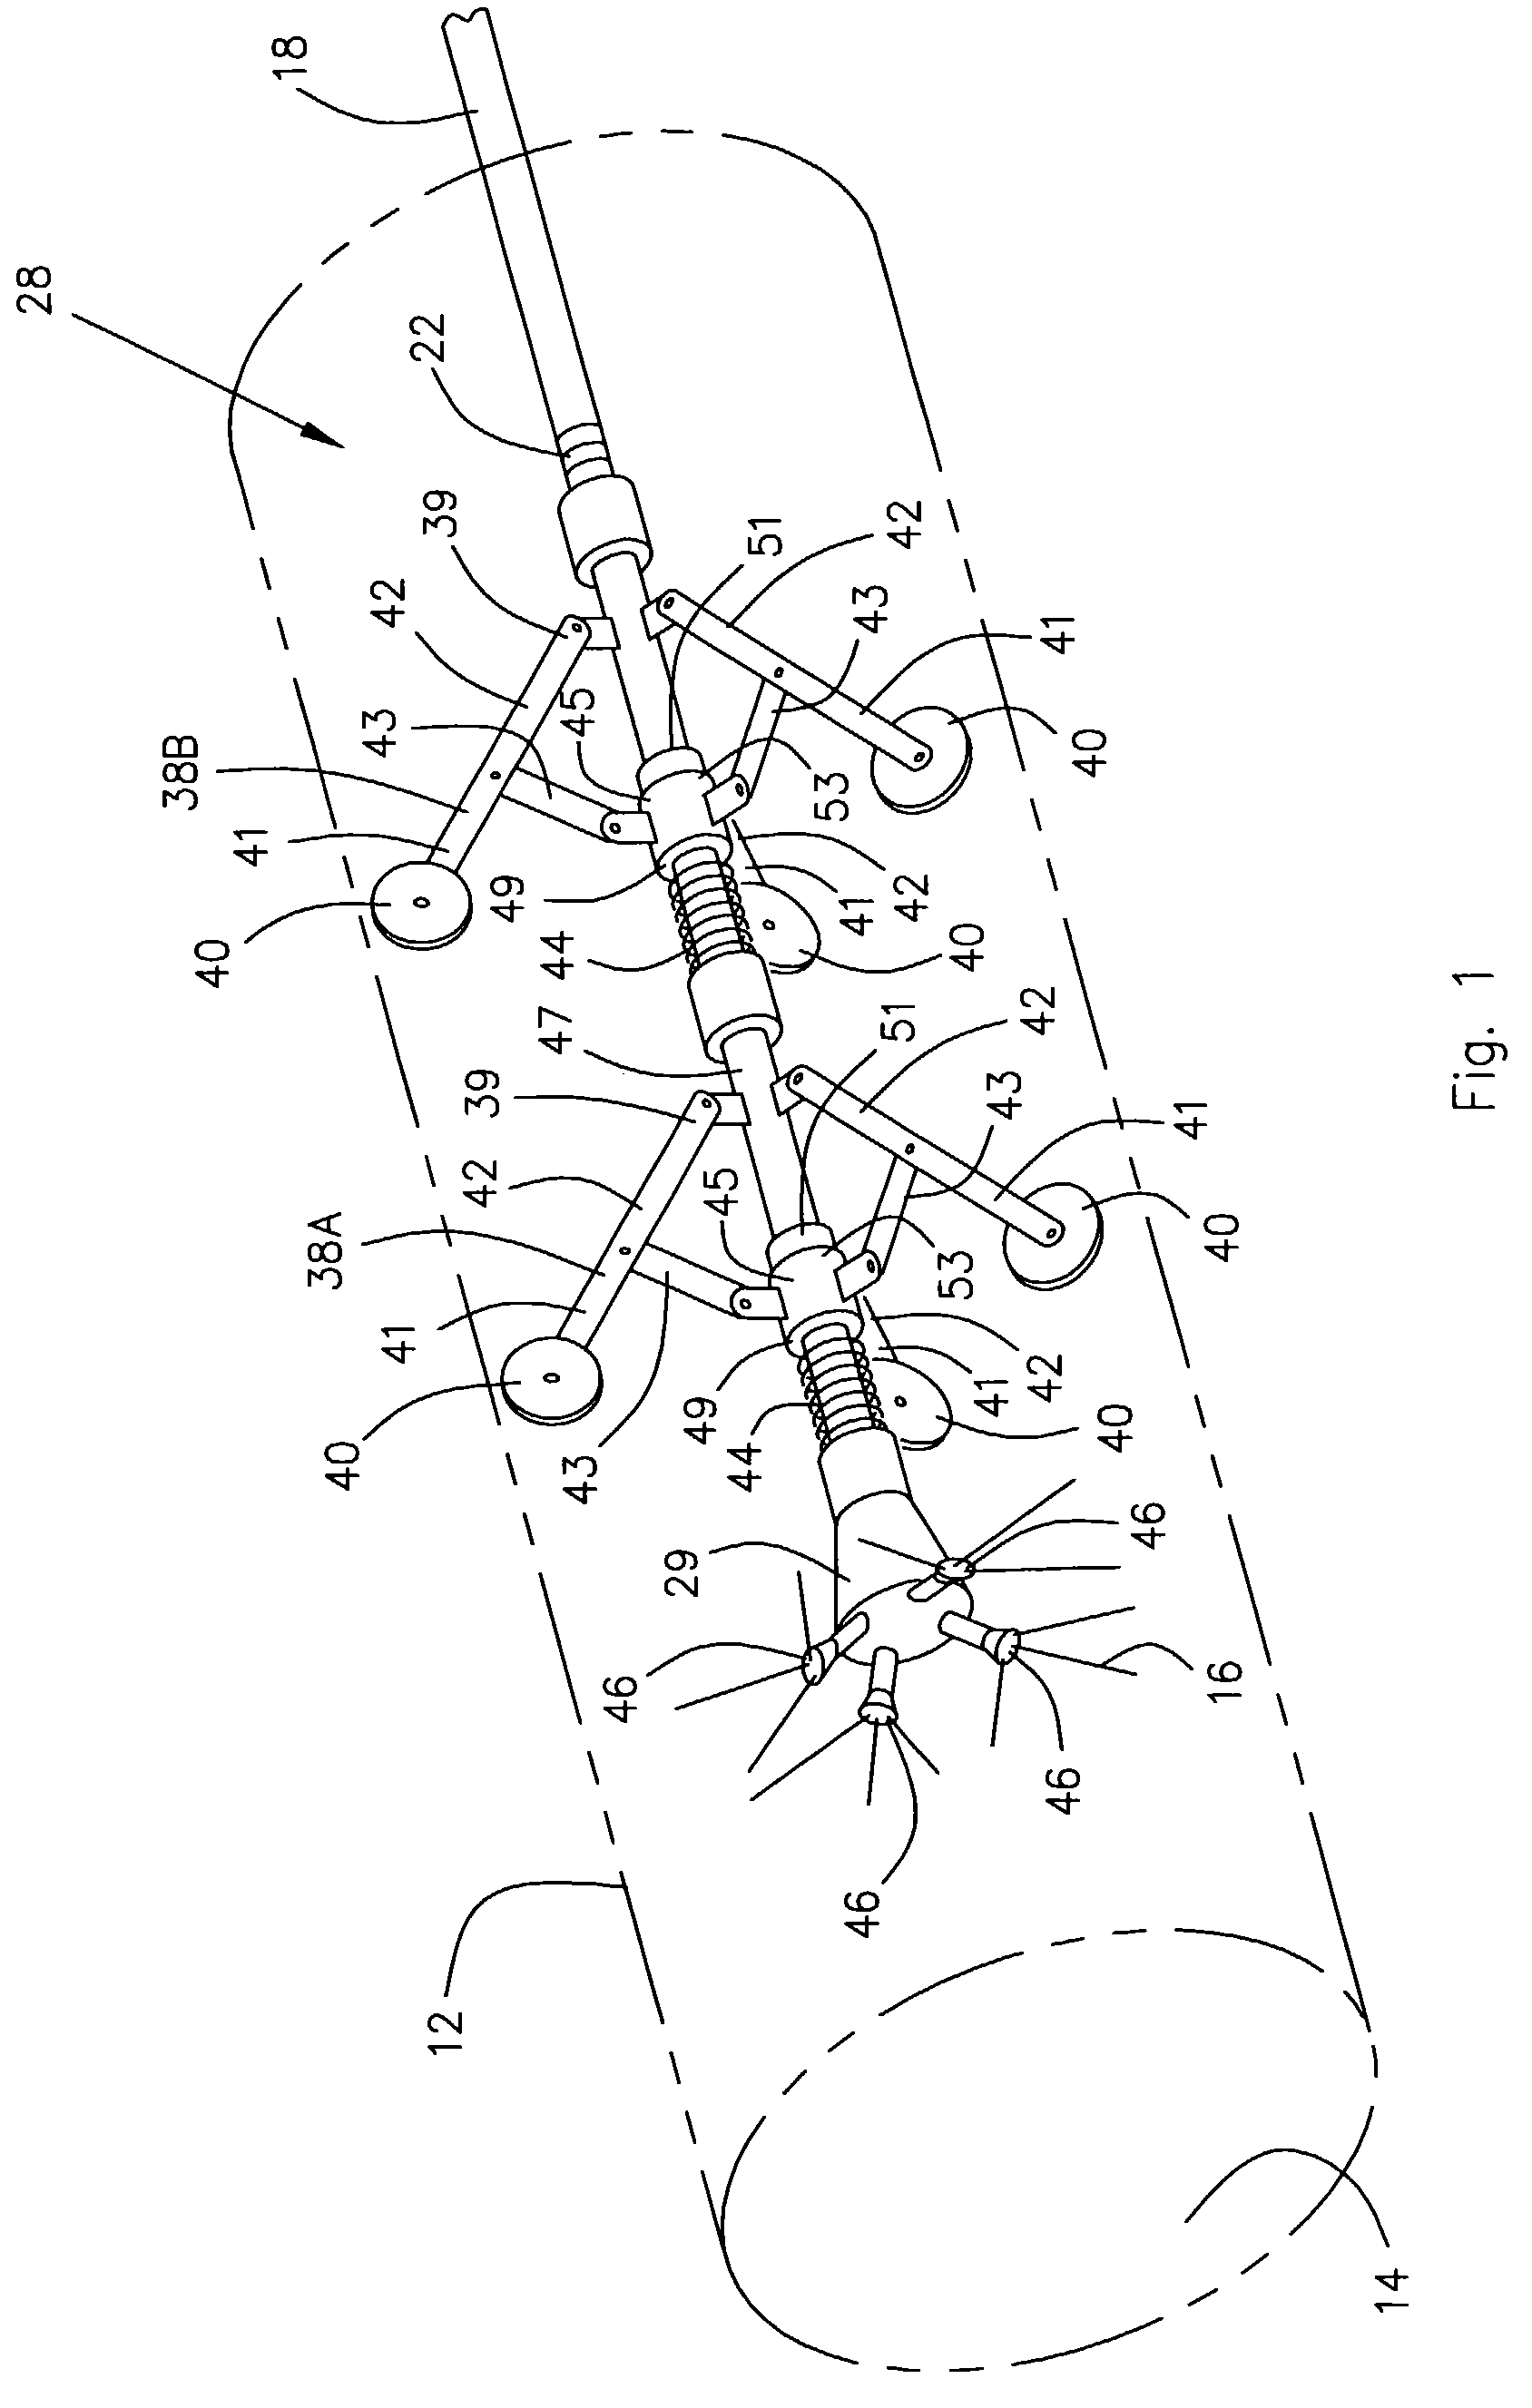 Method for applying liner to air duct